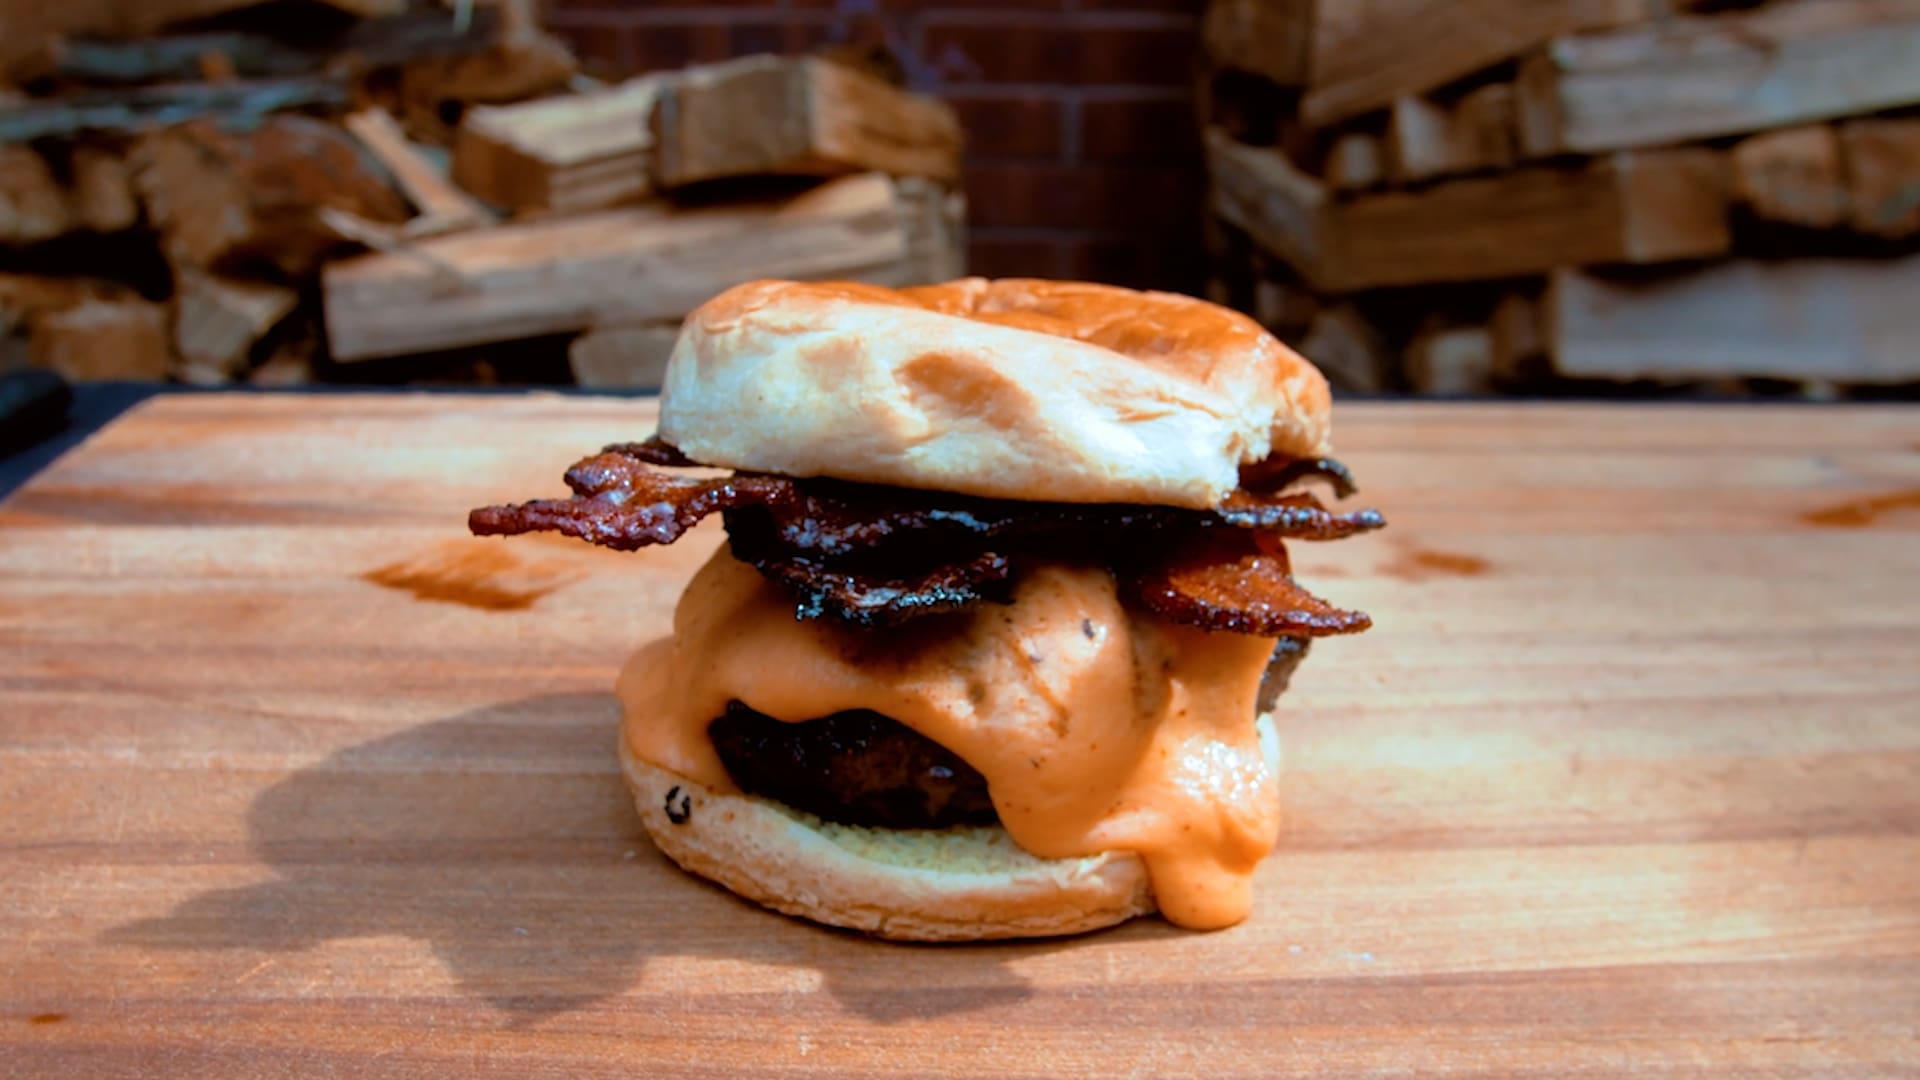 Wagyu Burger with Beer Cheese and Crispy Bacon